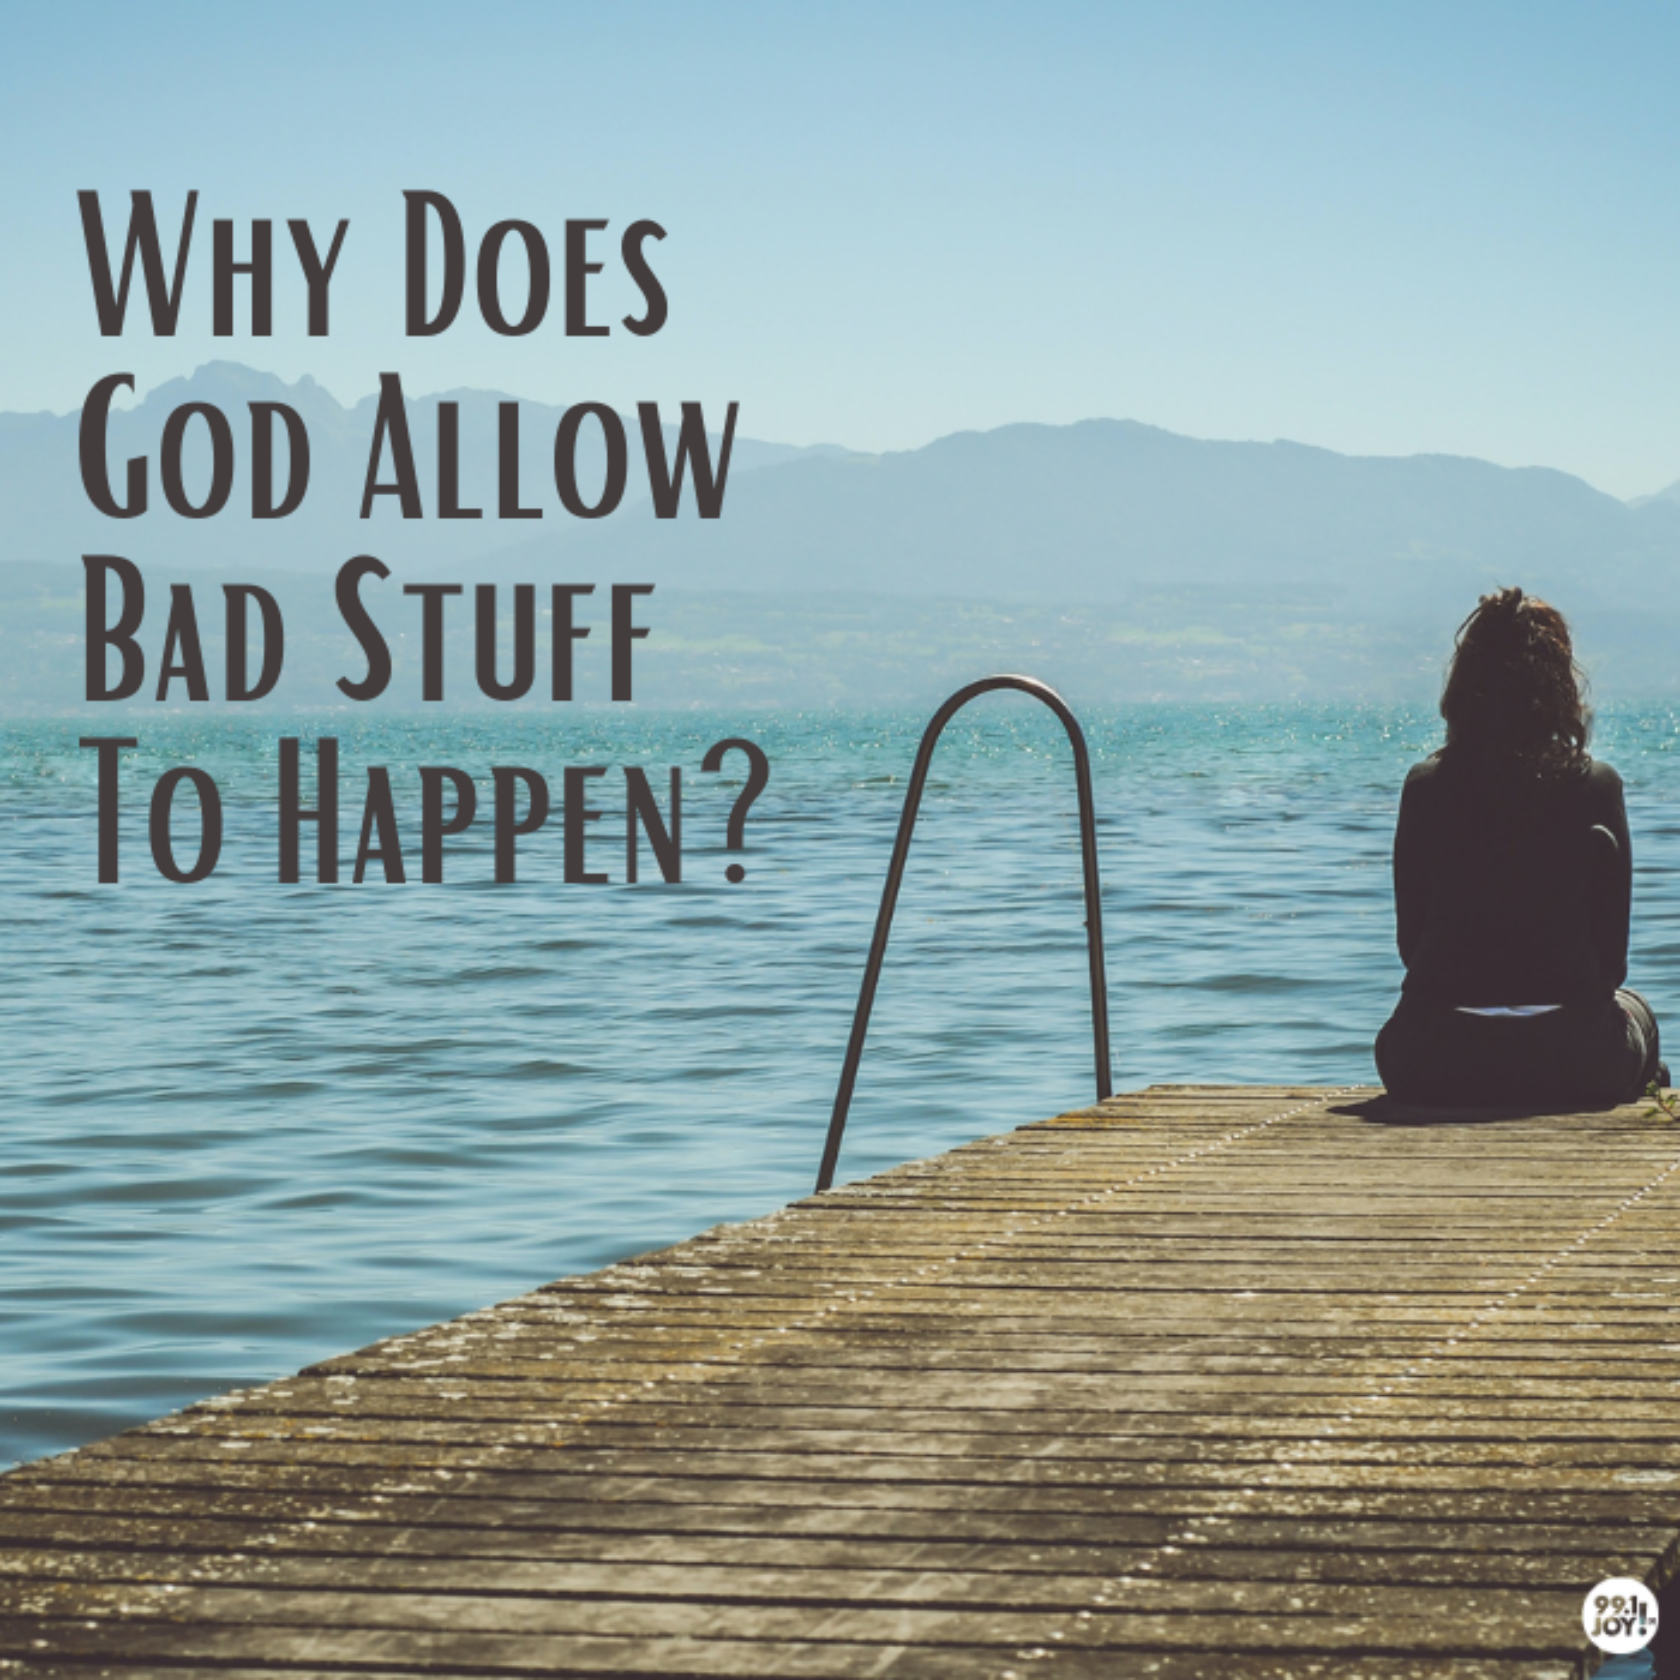 Why Does God Allow Bad Stuff To Happen?